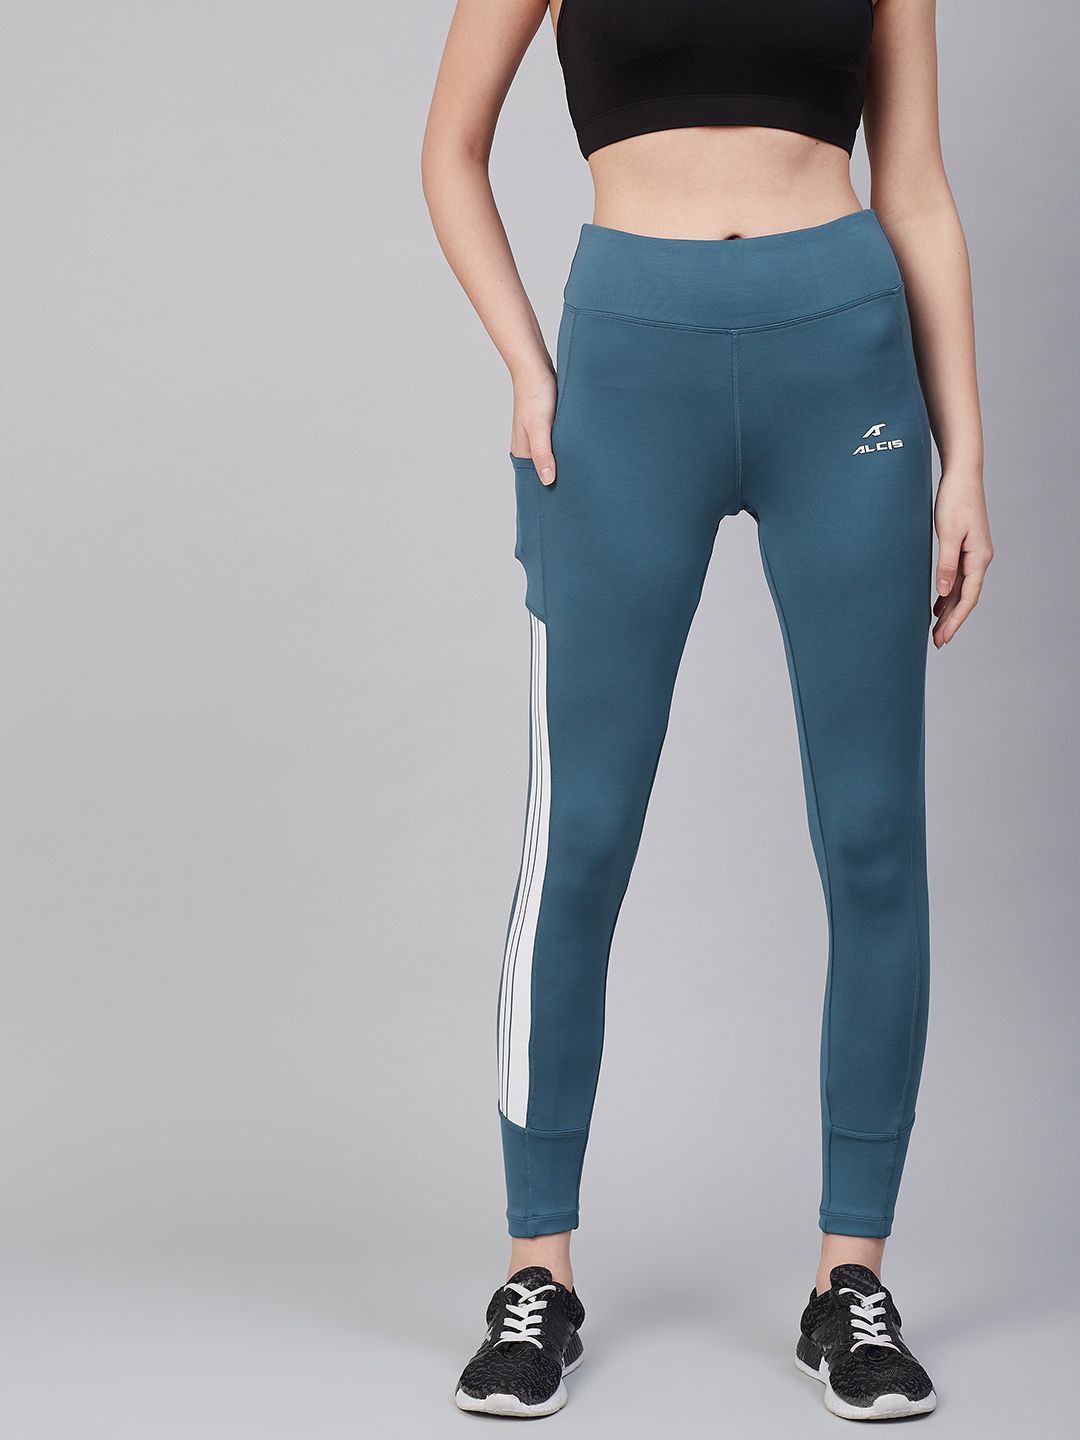 Alcis Women Blue Solid Training Tights Price in India